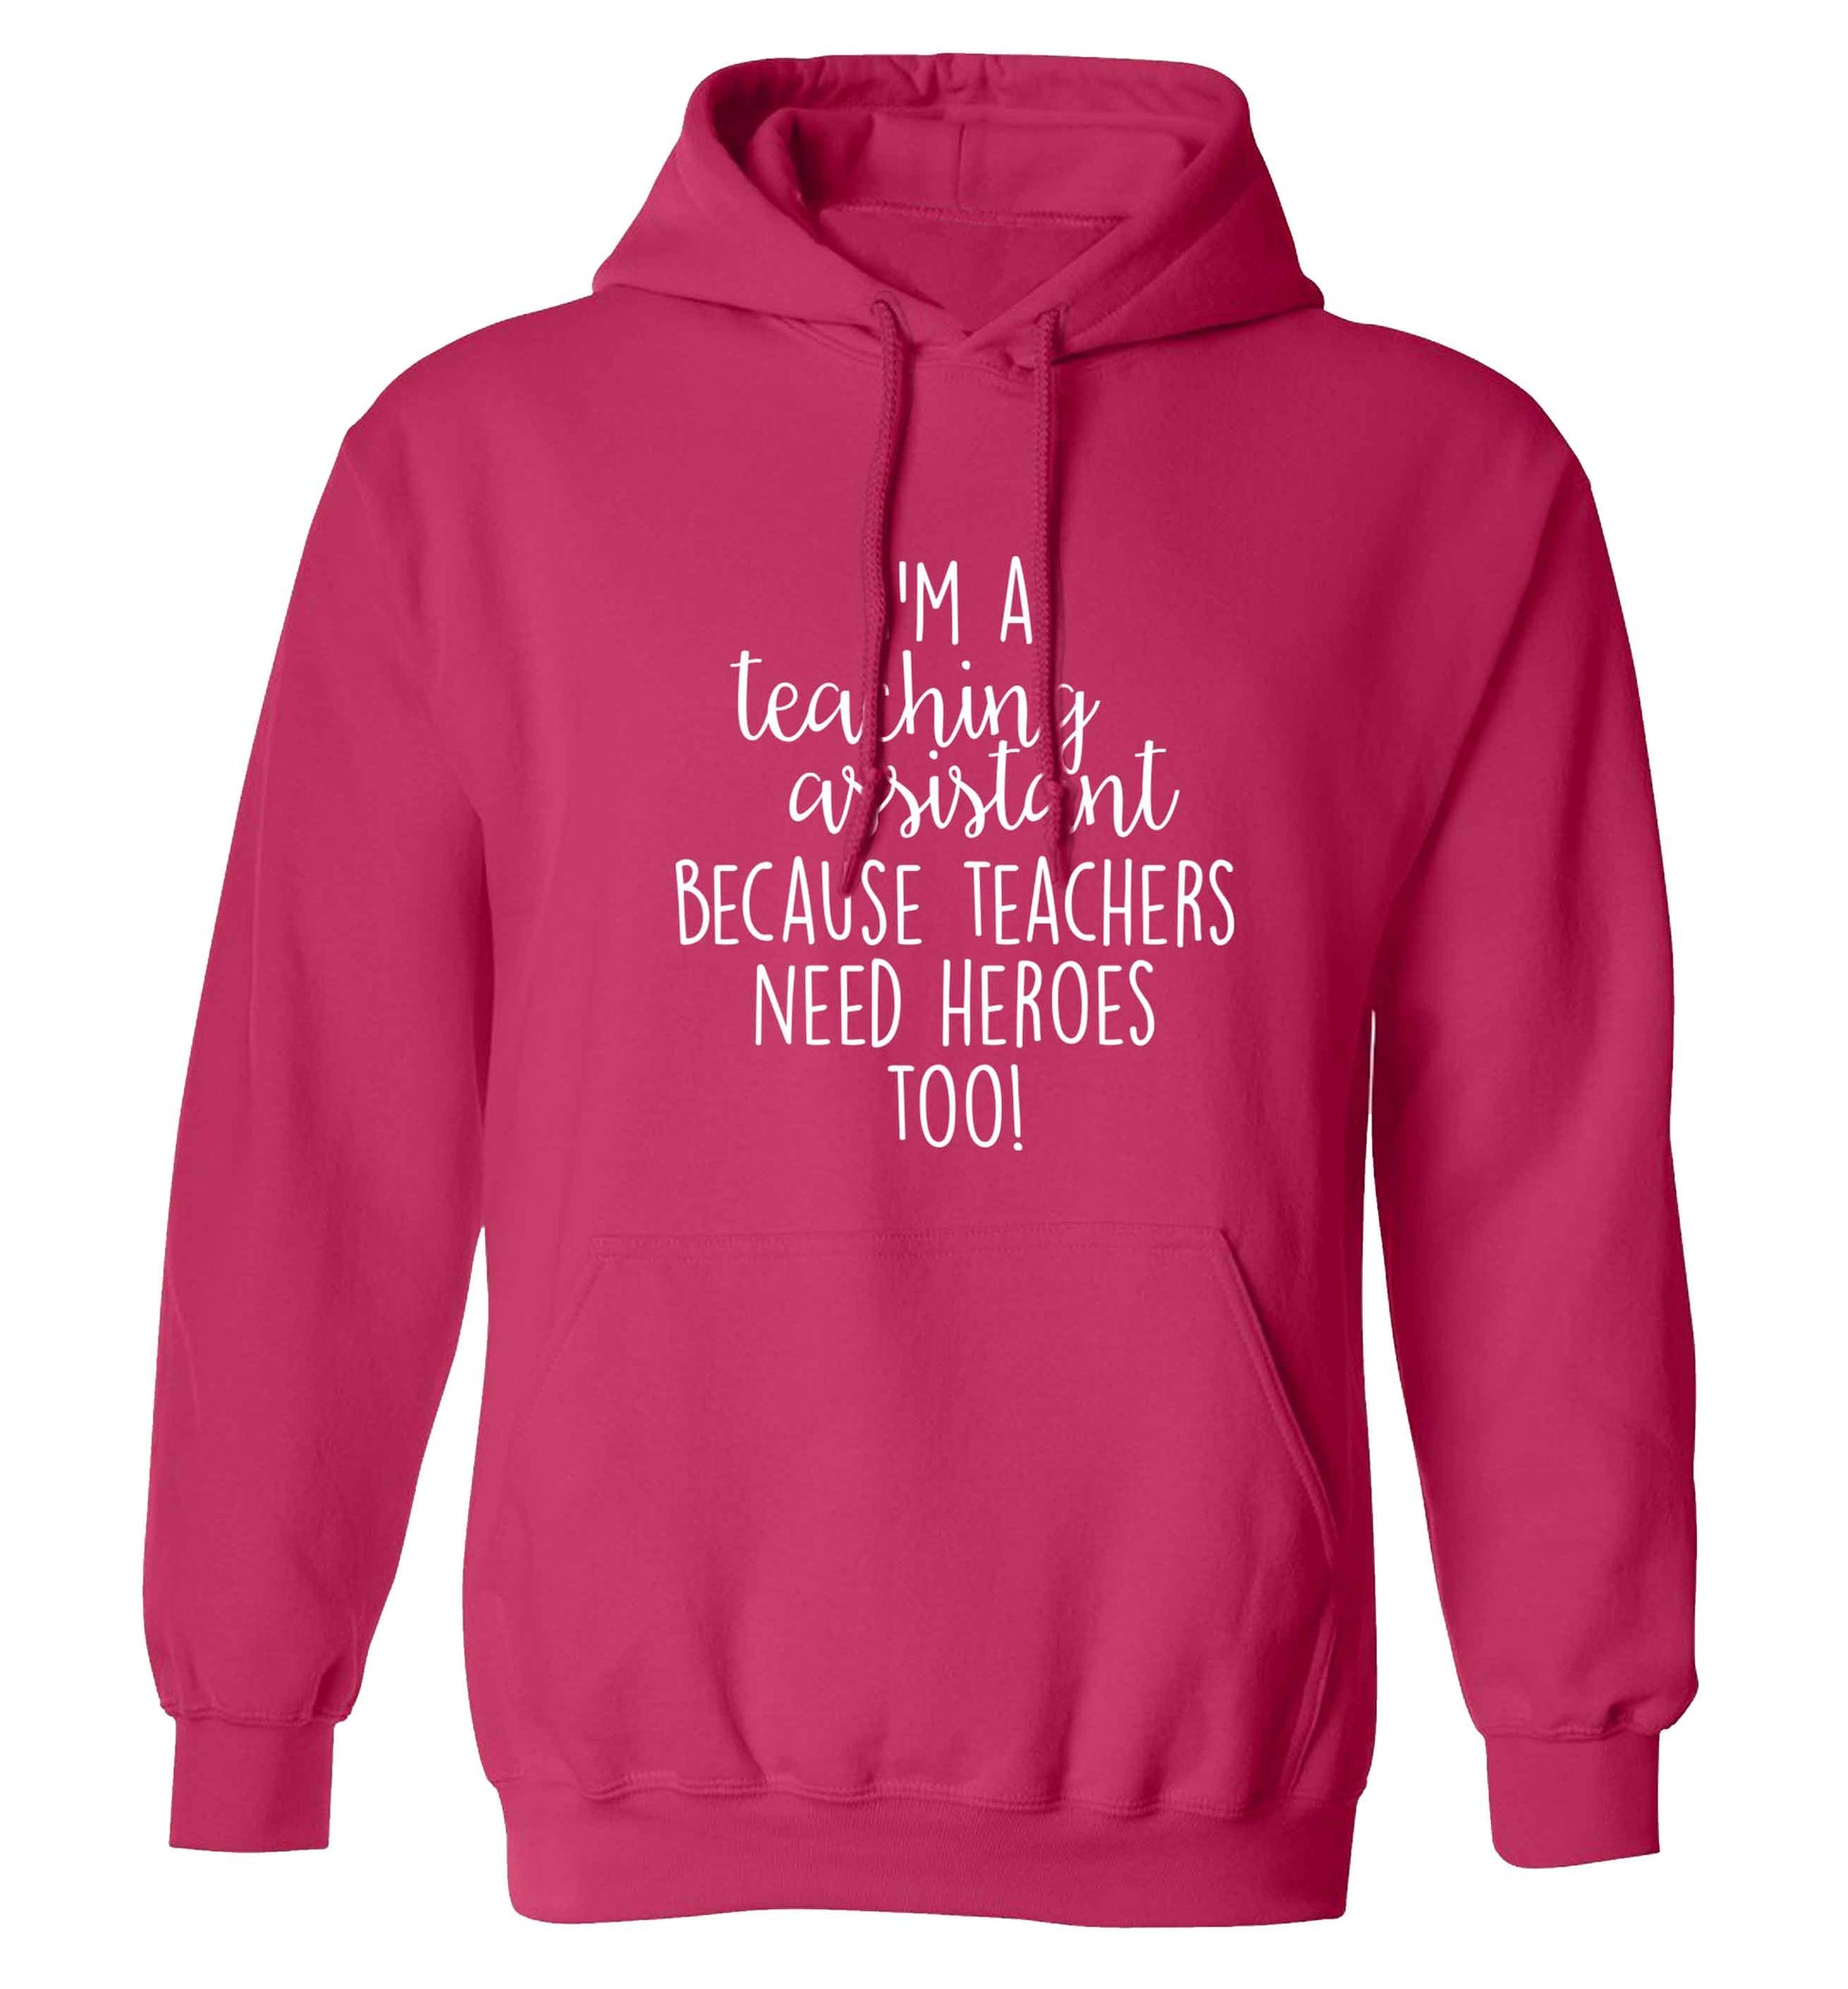 I'm a teaching assistant because teachers need heroes too! adults unisex pink hoodie 2XL